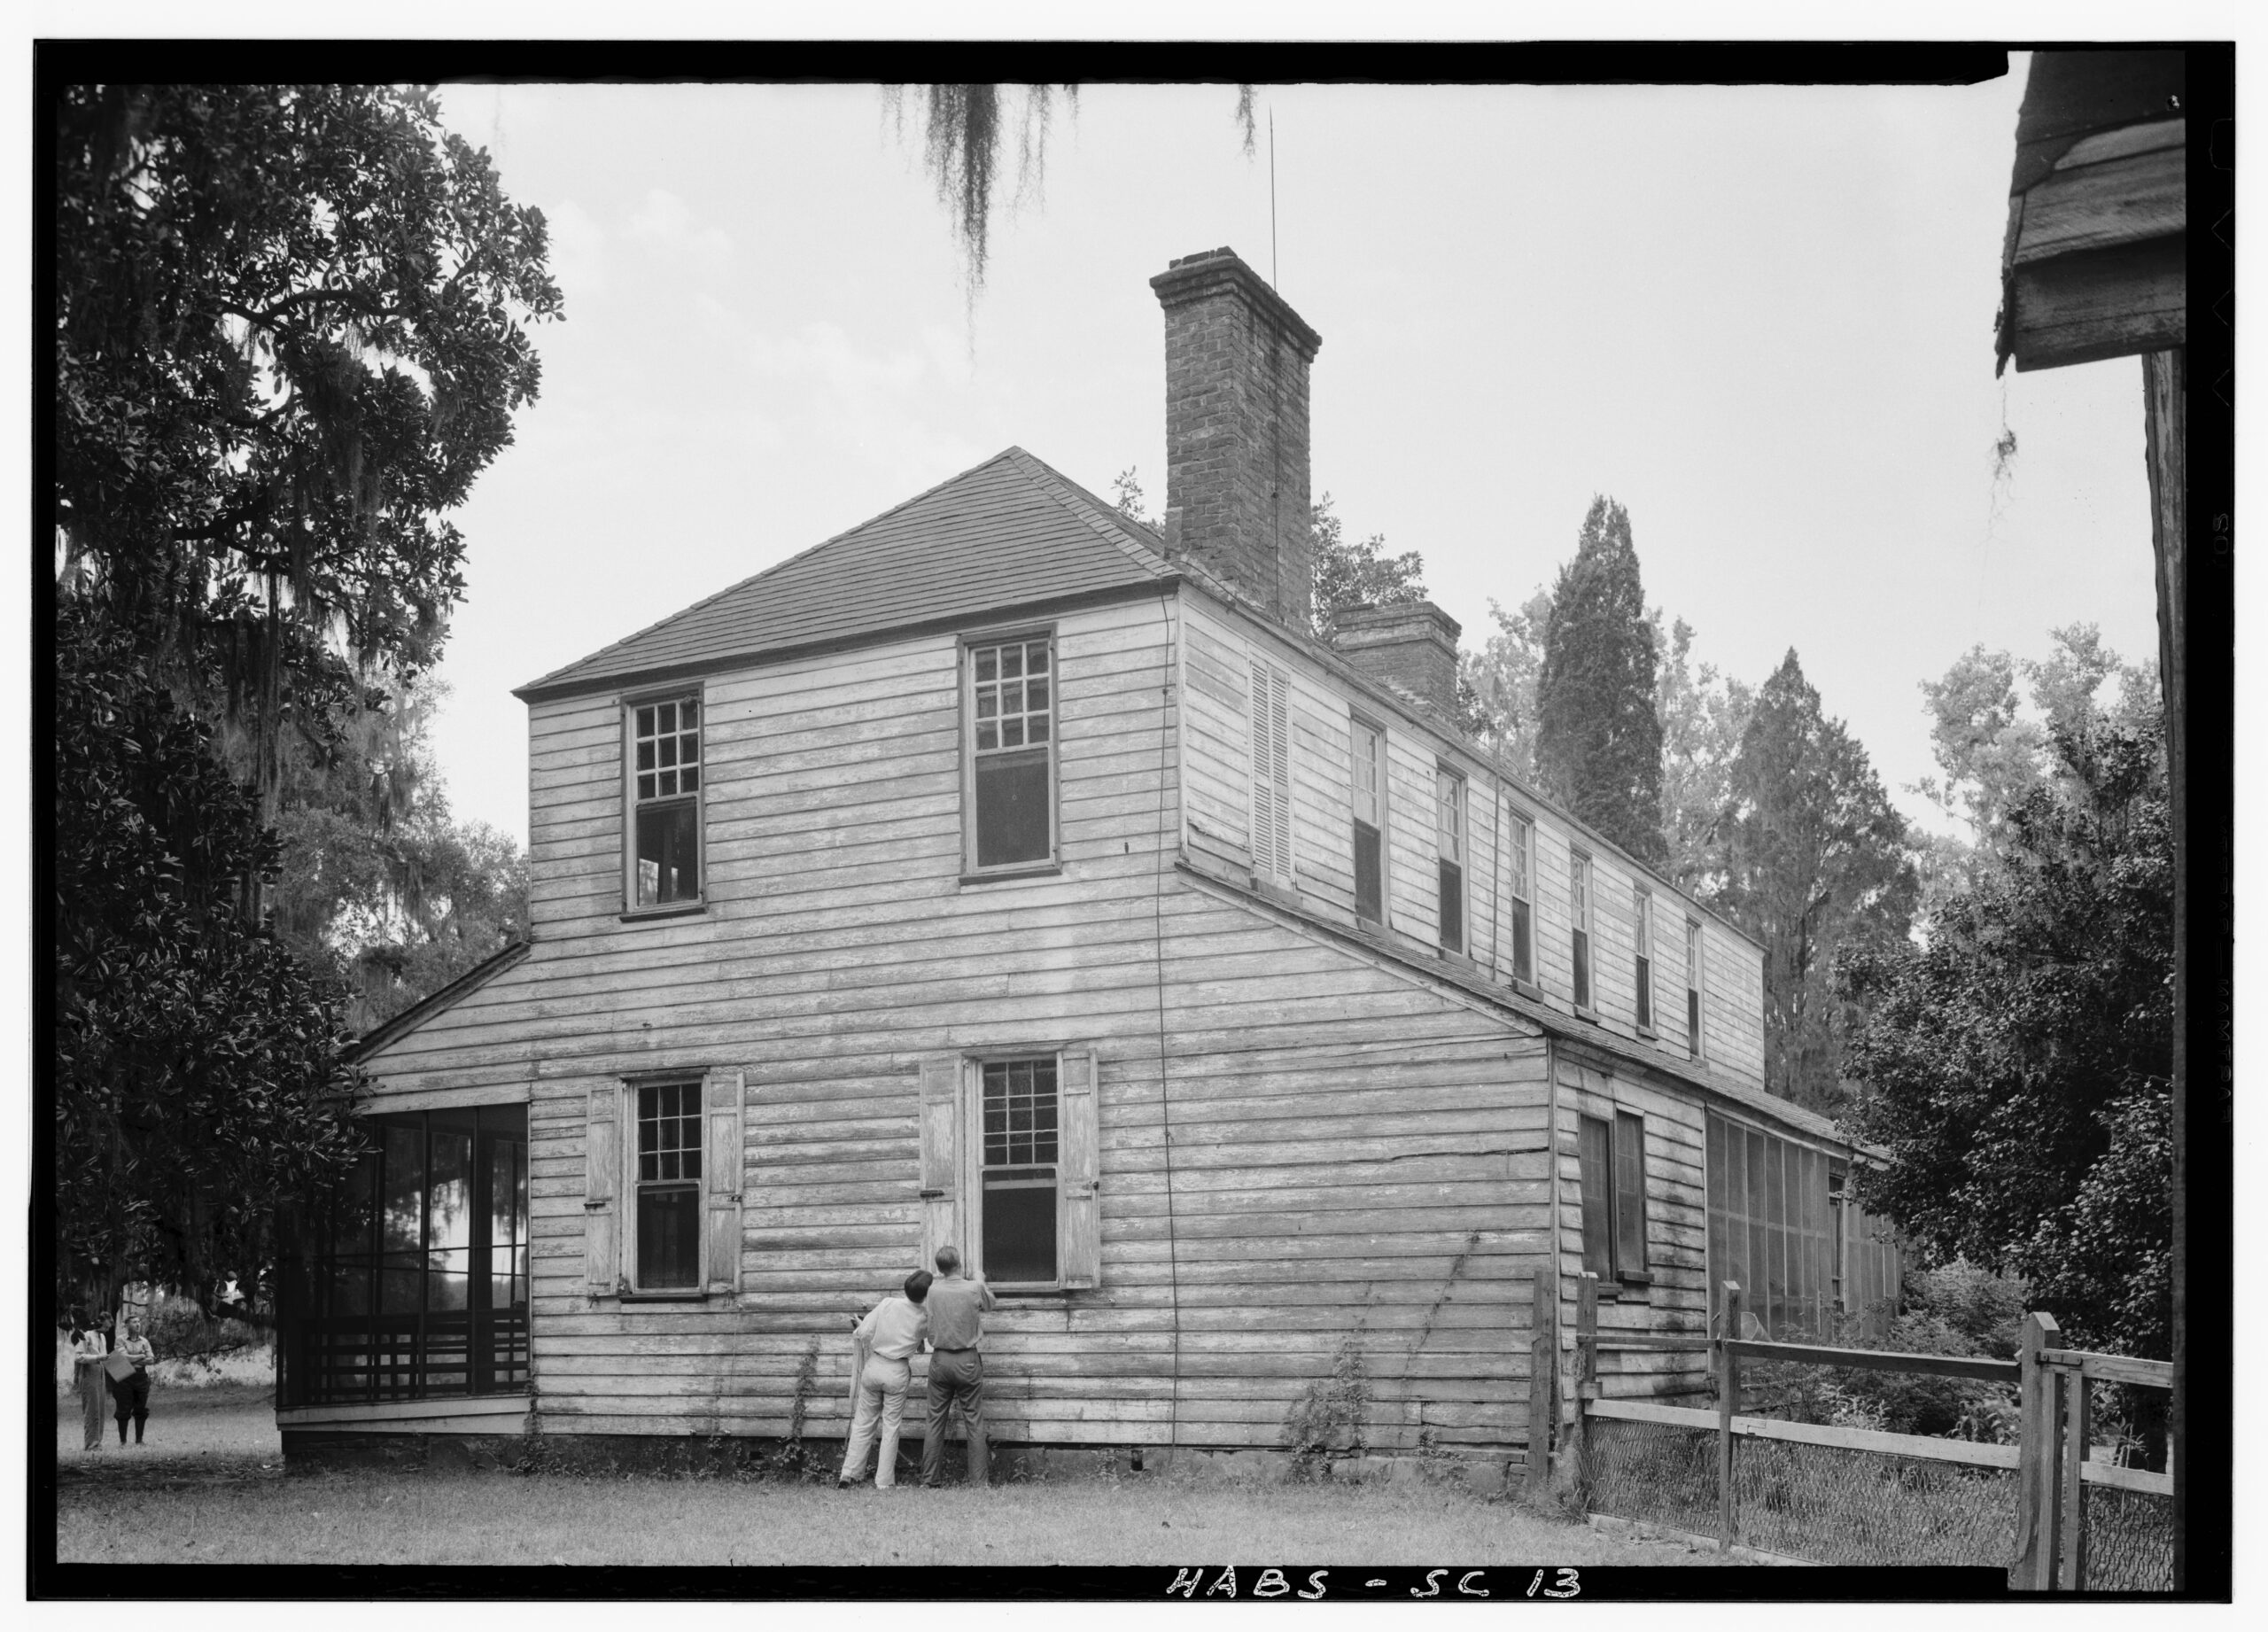 Historic_American_Buildings_Survey_Photographer_Thomas_T._Waterman,_June_1939_VIEW_OF_GABLE_END_-_Middleburg,_Cooper_River,_East_Branch,_Huger,_Berkeley_County,_SC_HABS_SC,8-HUG.V,1-3